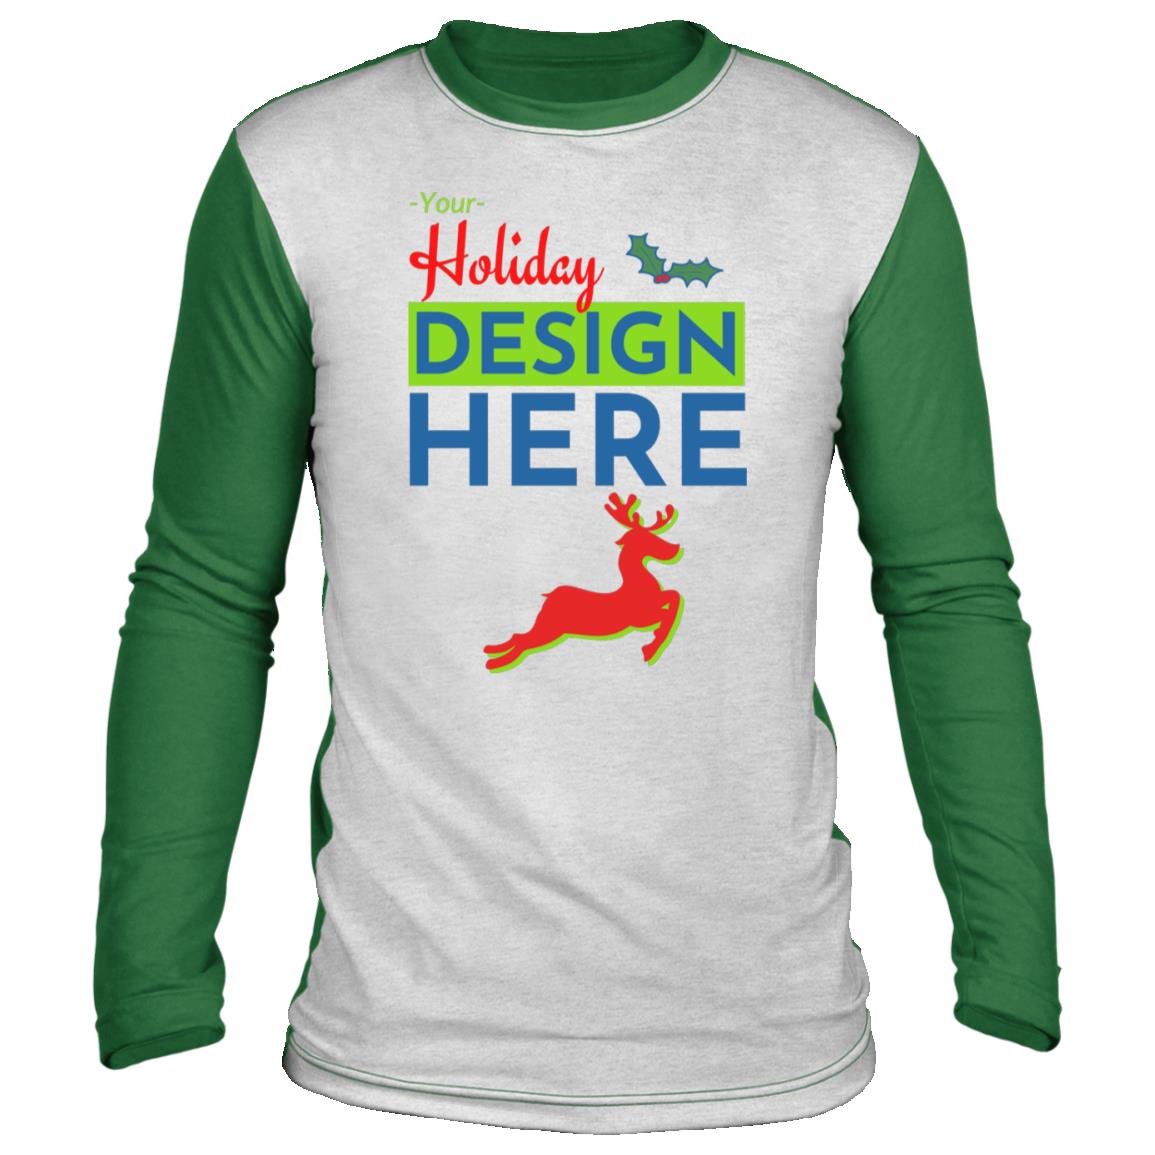 YDH-Holiday-RDeer-SCLS Sublimated Long Sleeve Shirt